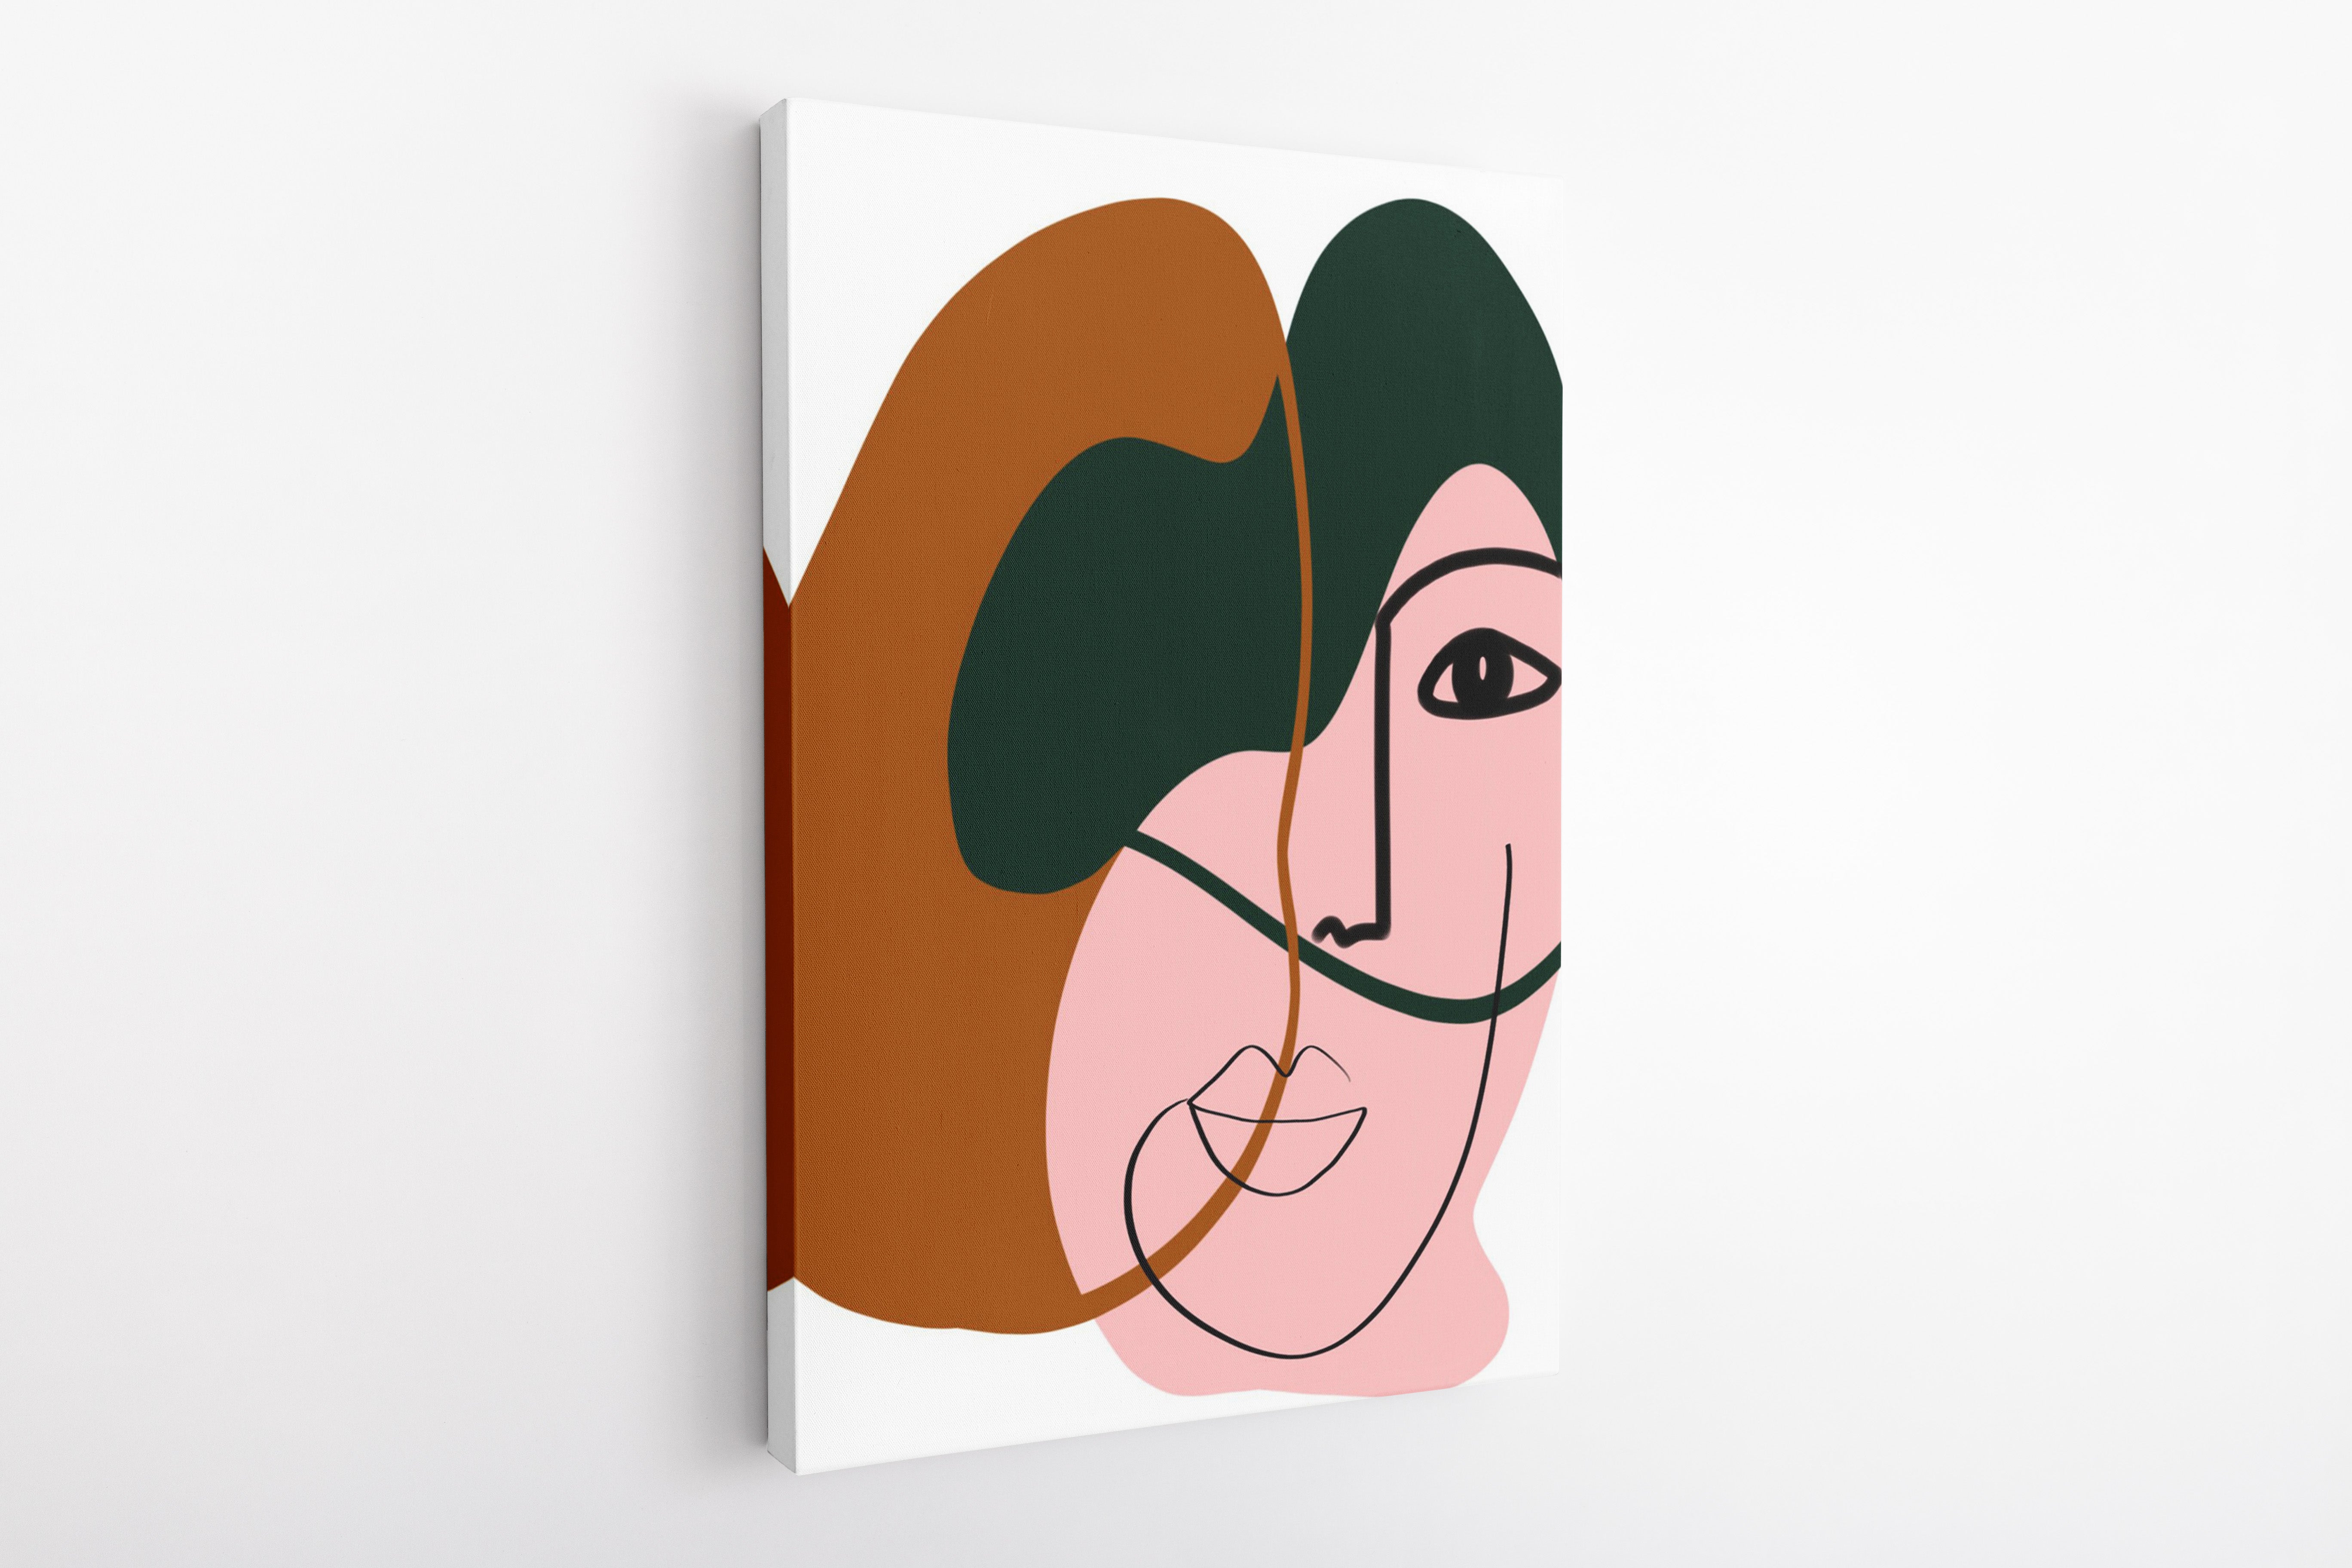 Picasso's Abstract Modern Art Woman's face - Canvas Art